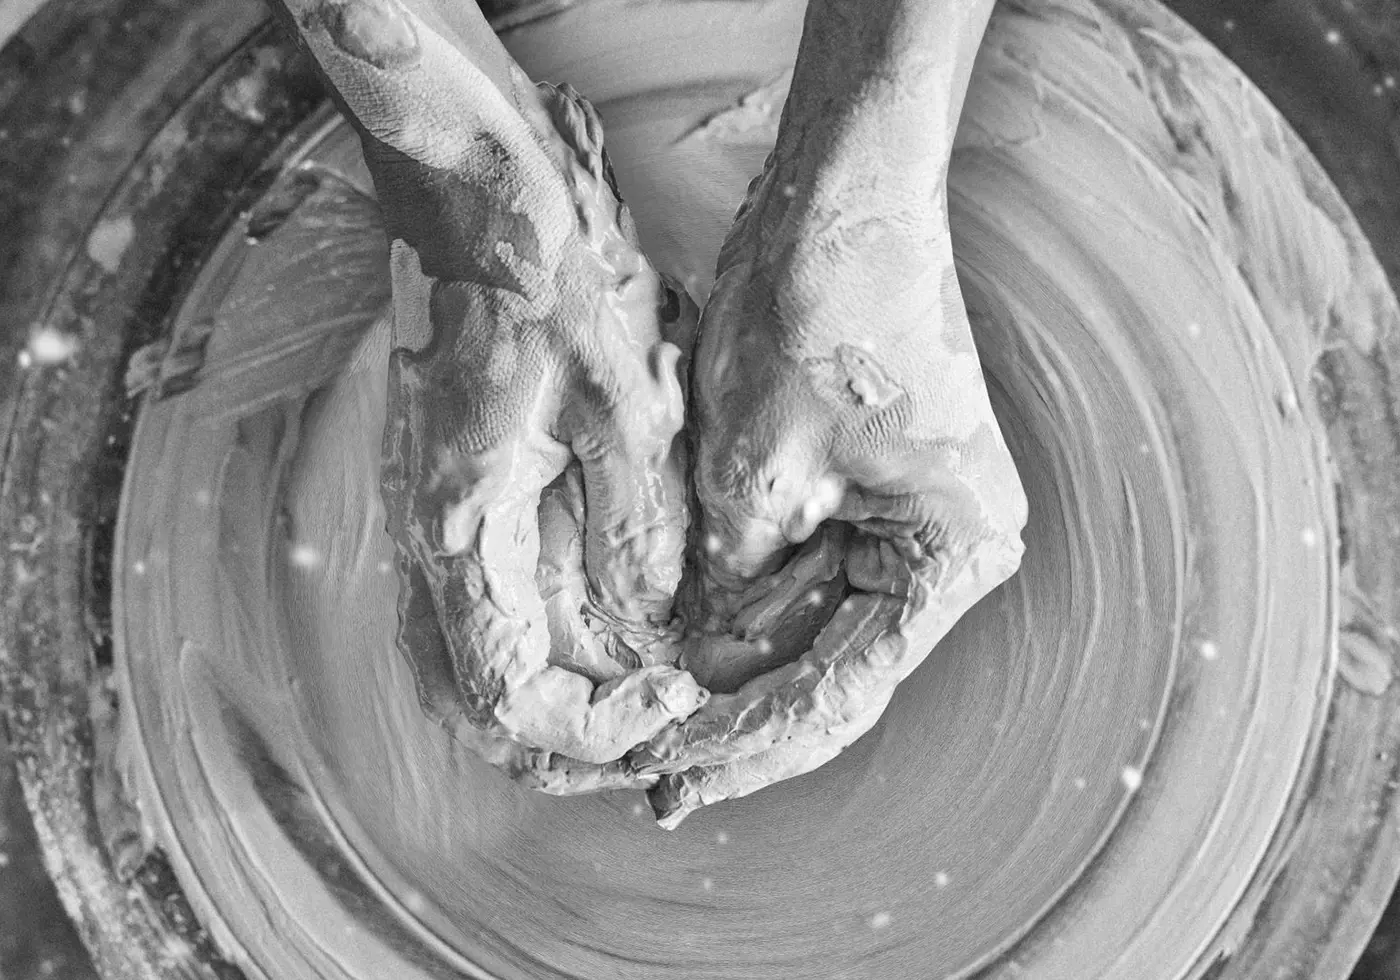 Two hands shaping wet clay on a pottery wheel.